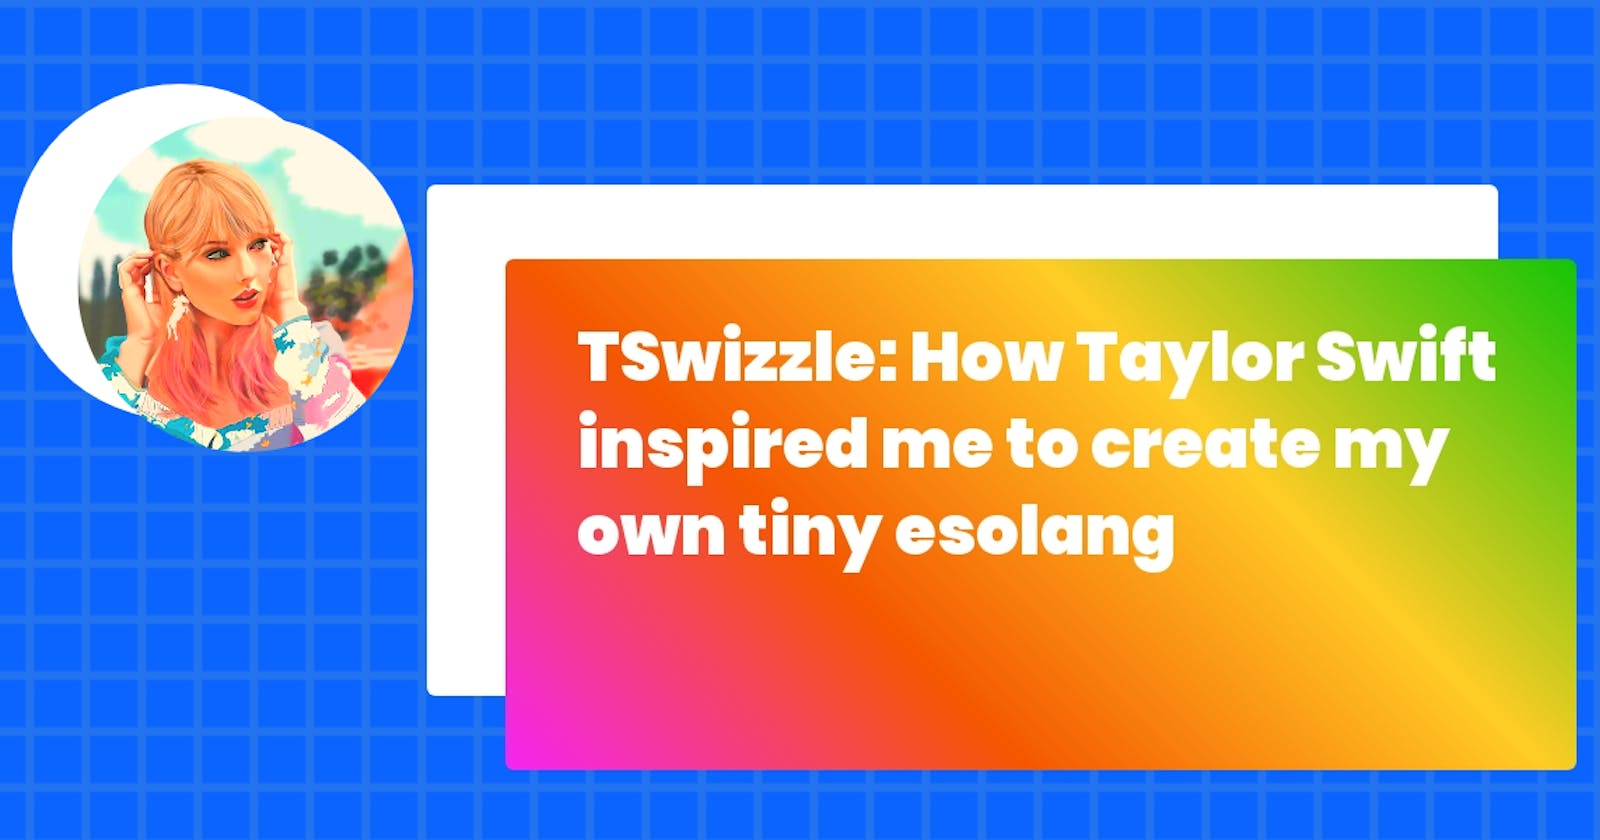 TSwizzle: How Taylor Swift inspired me to create my own tiny esolang